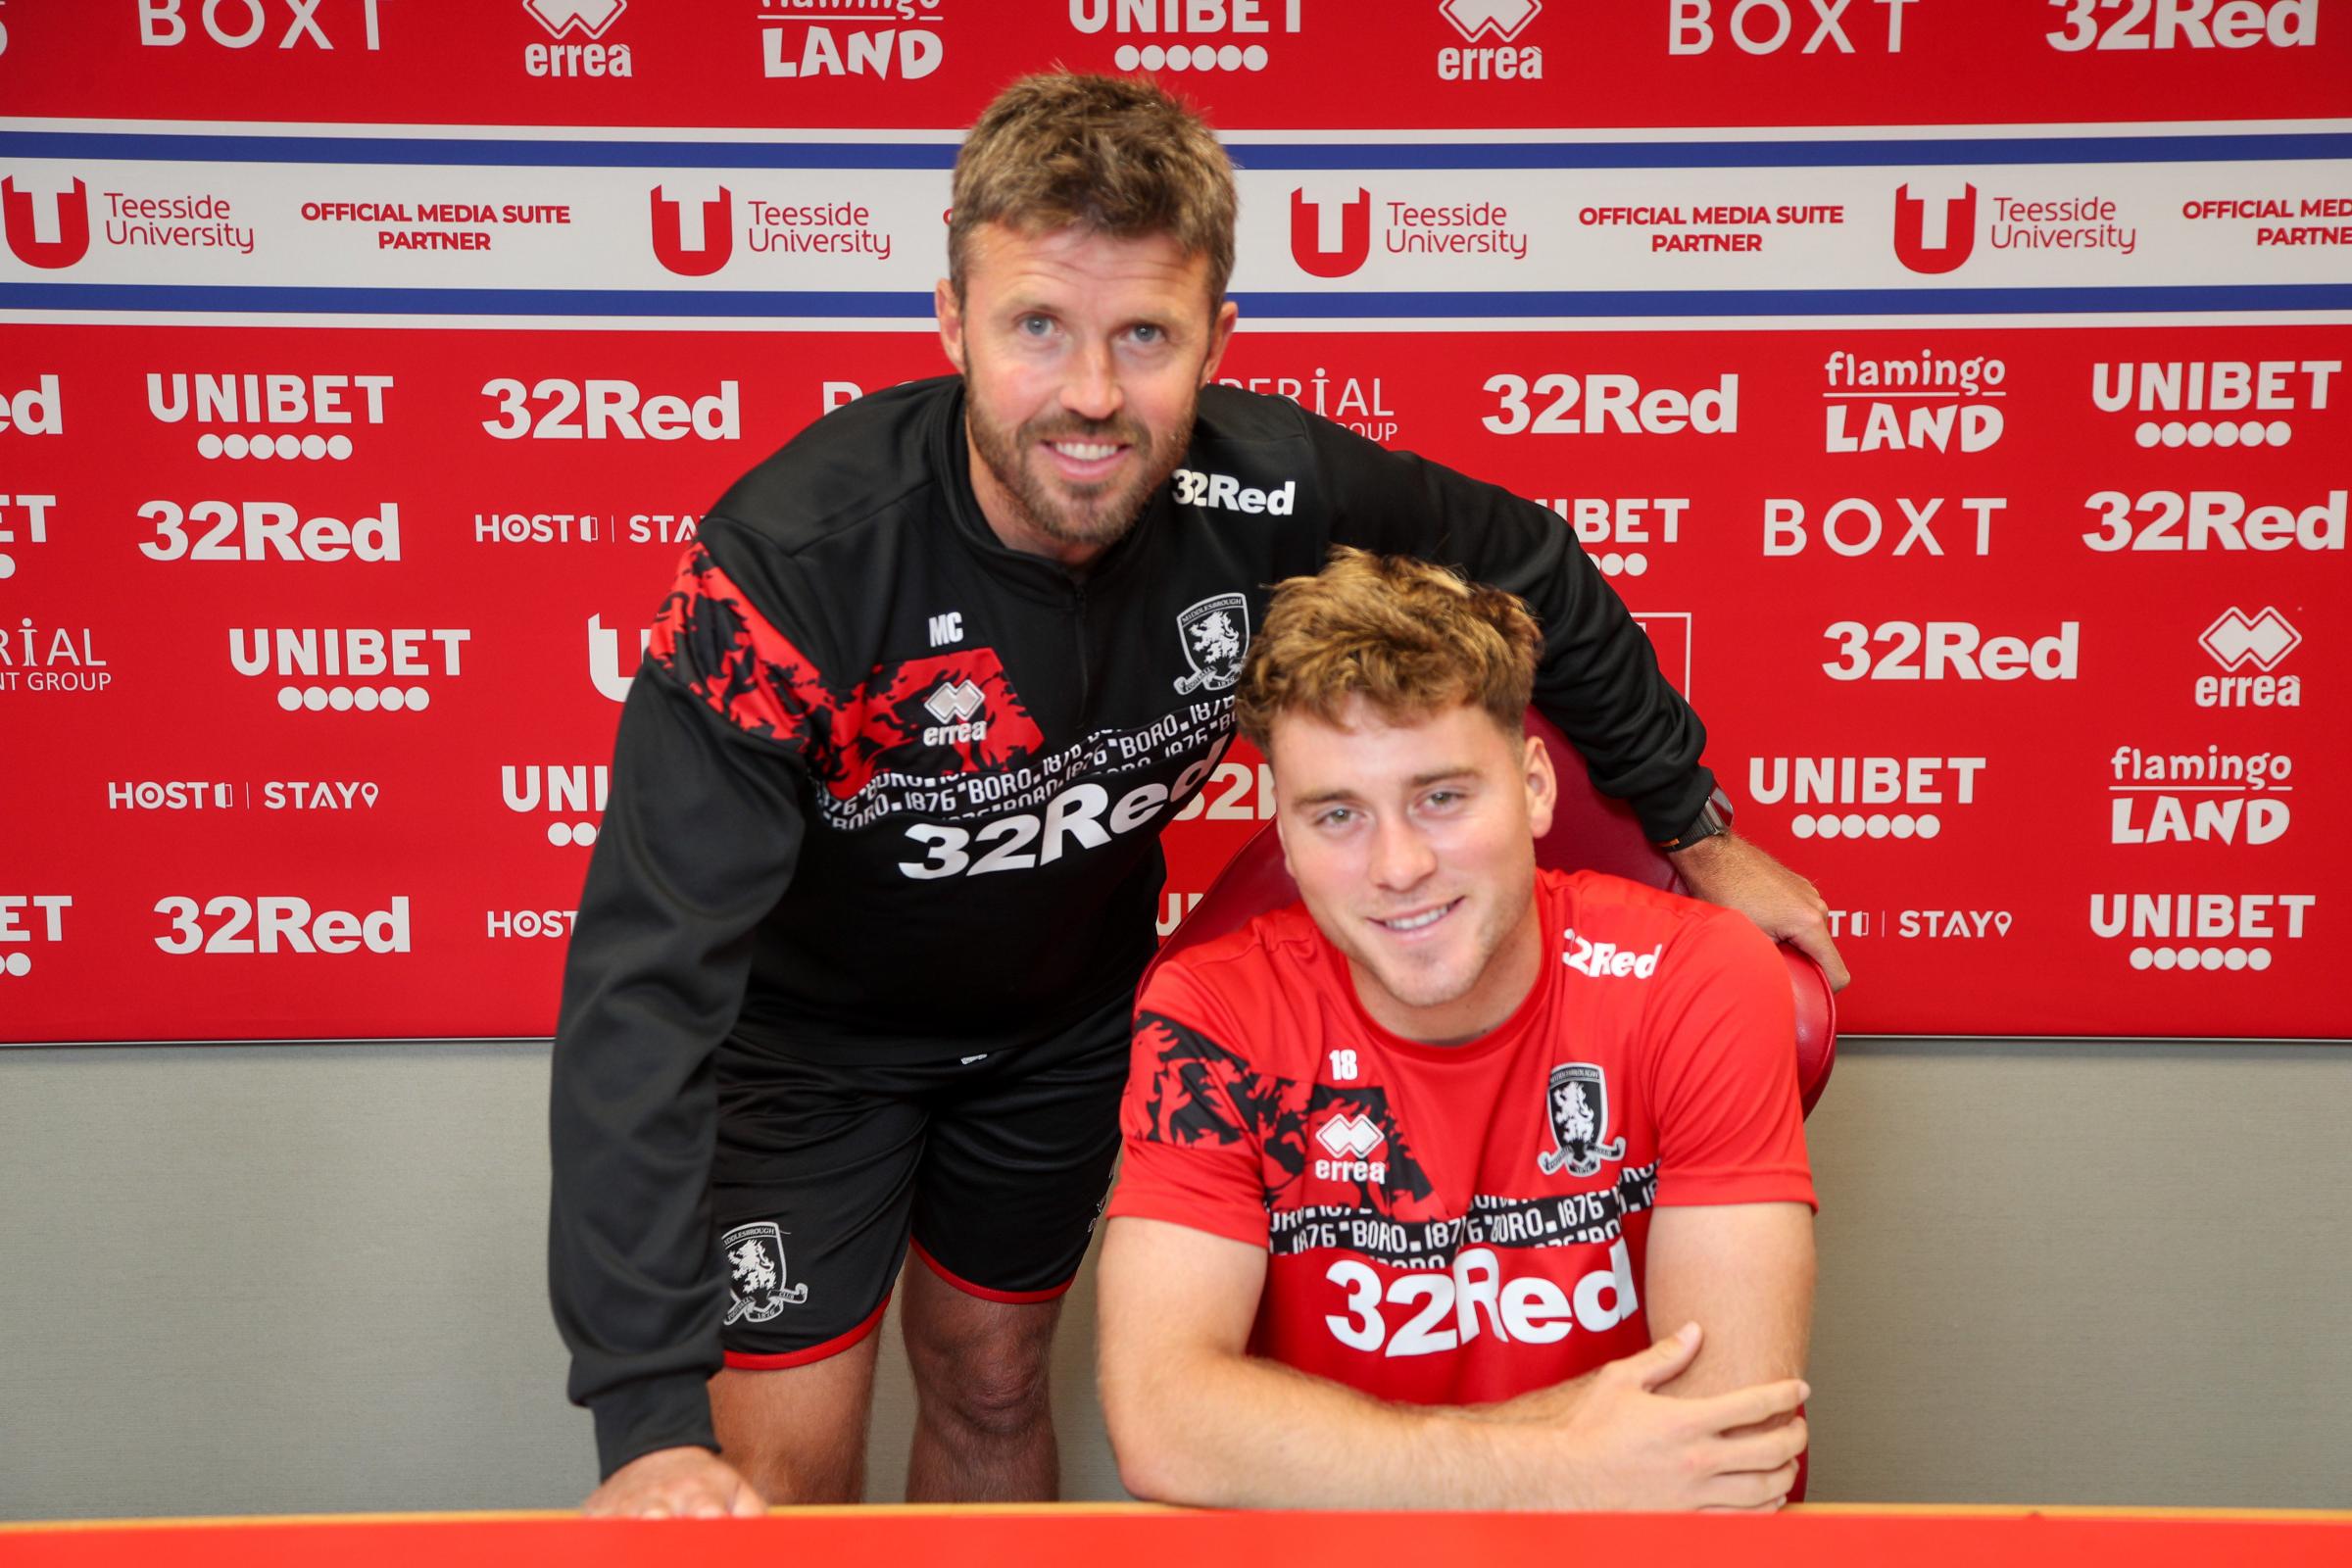 Middlesbrough complete signing of midfielder Aidan Morris